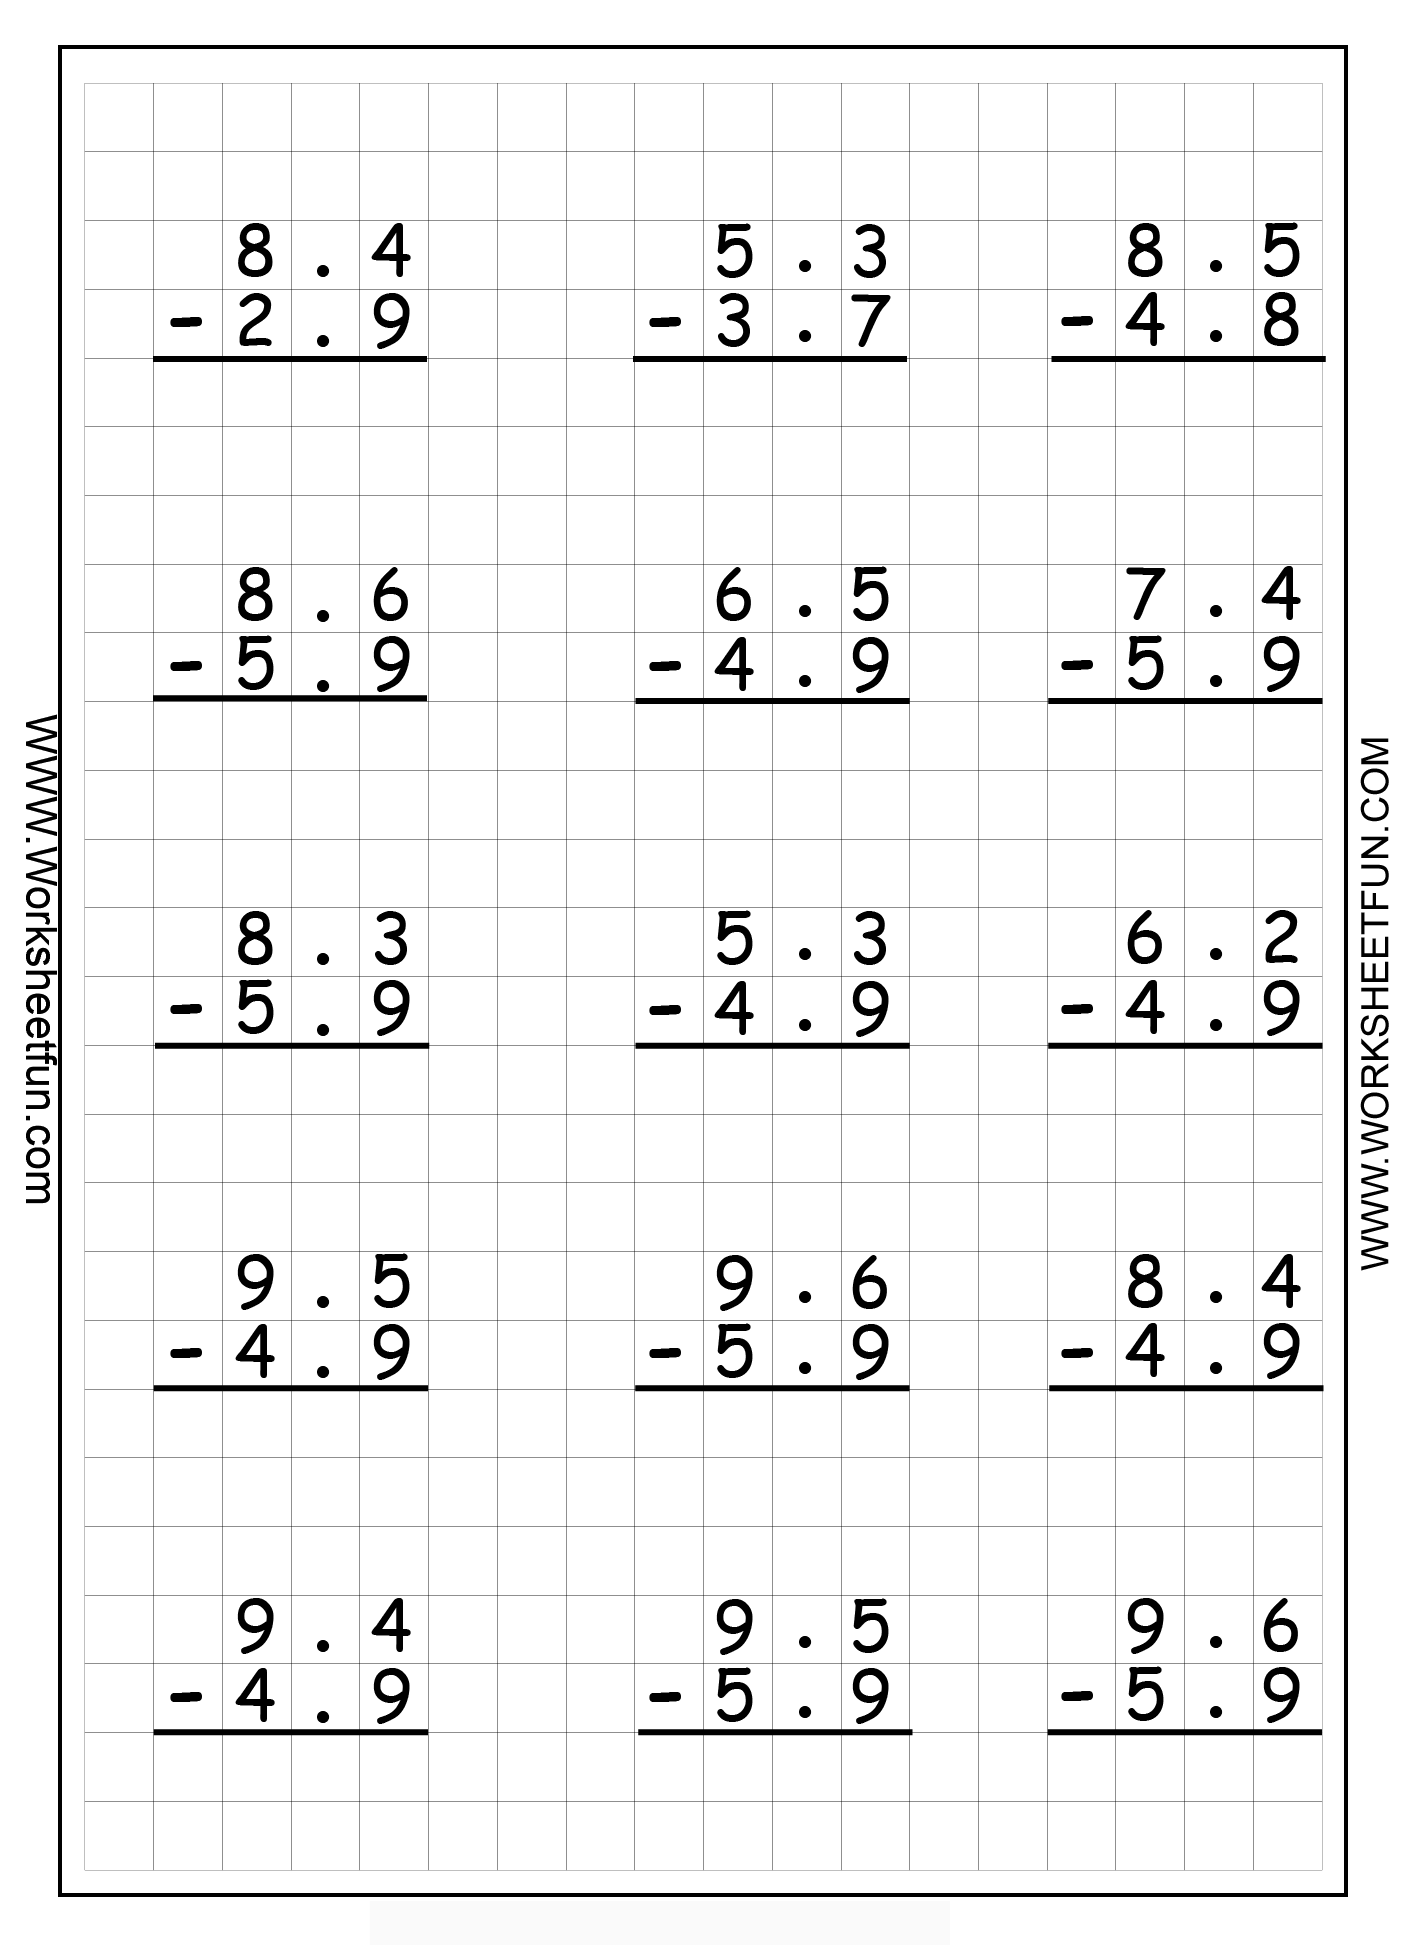 17 Best Images of Printable Place Value Worksheets 3rd Grade - 3rd